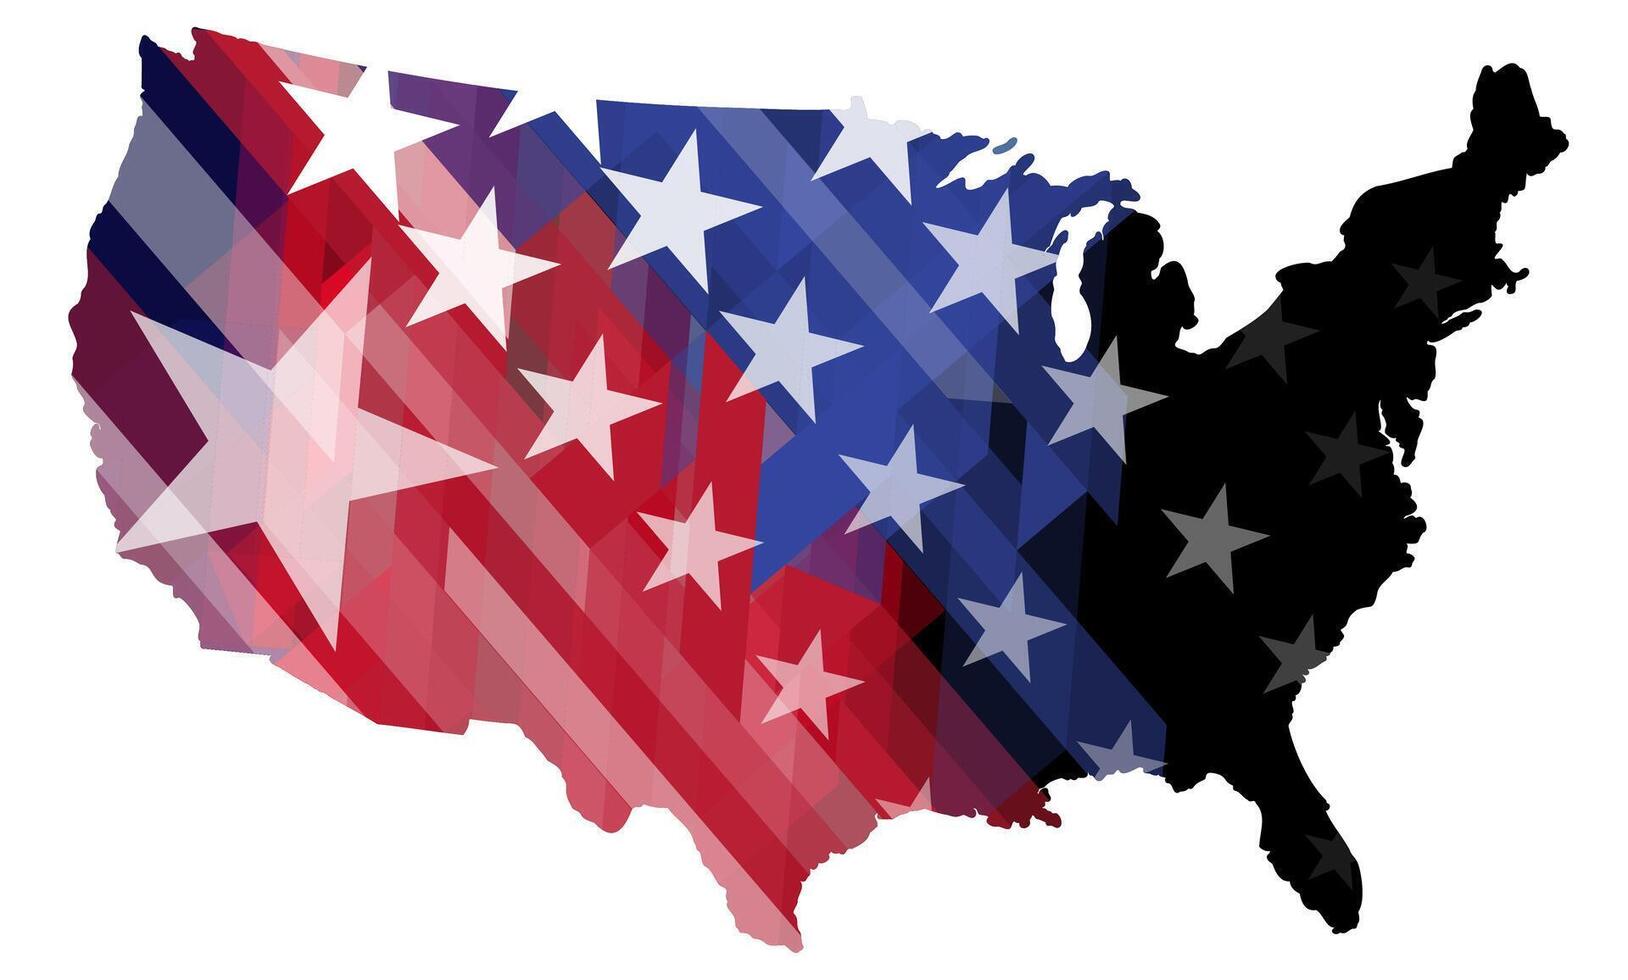 United states map with usa flag inside. Abstract geometric vector banner with a triangular pattern